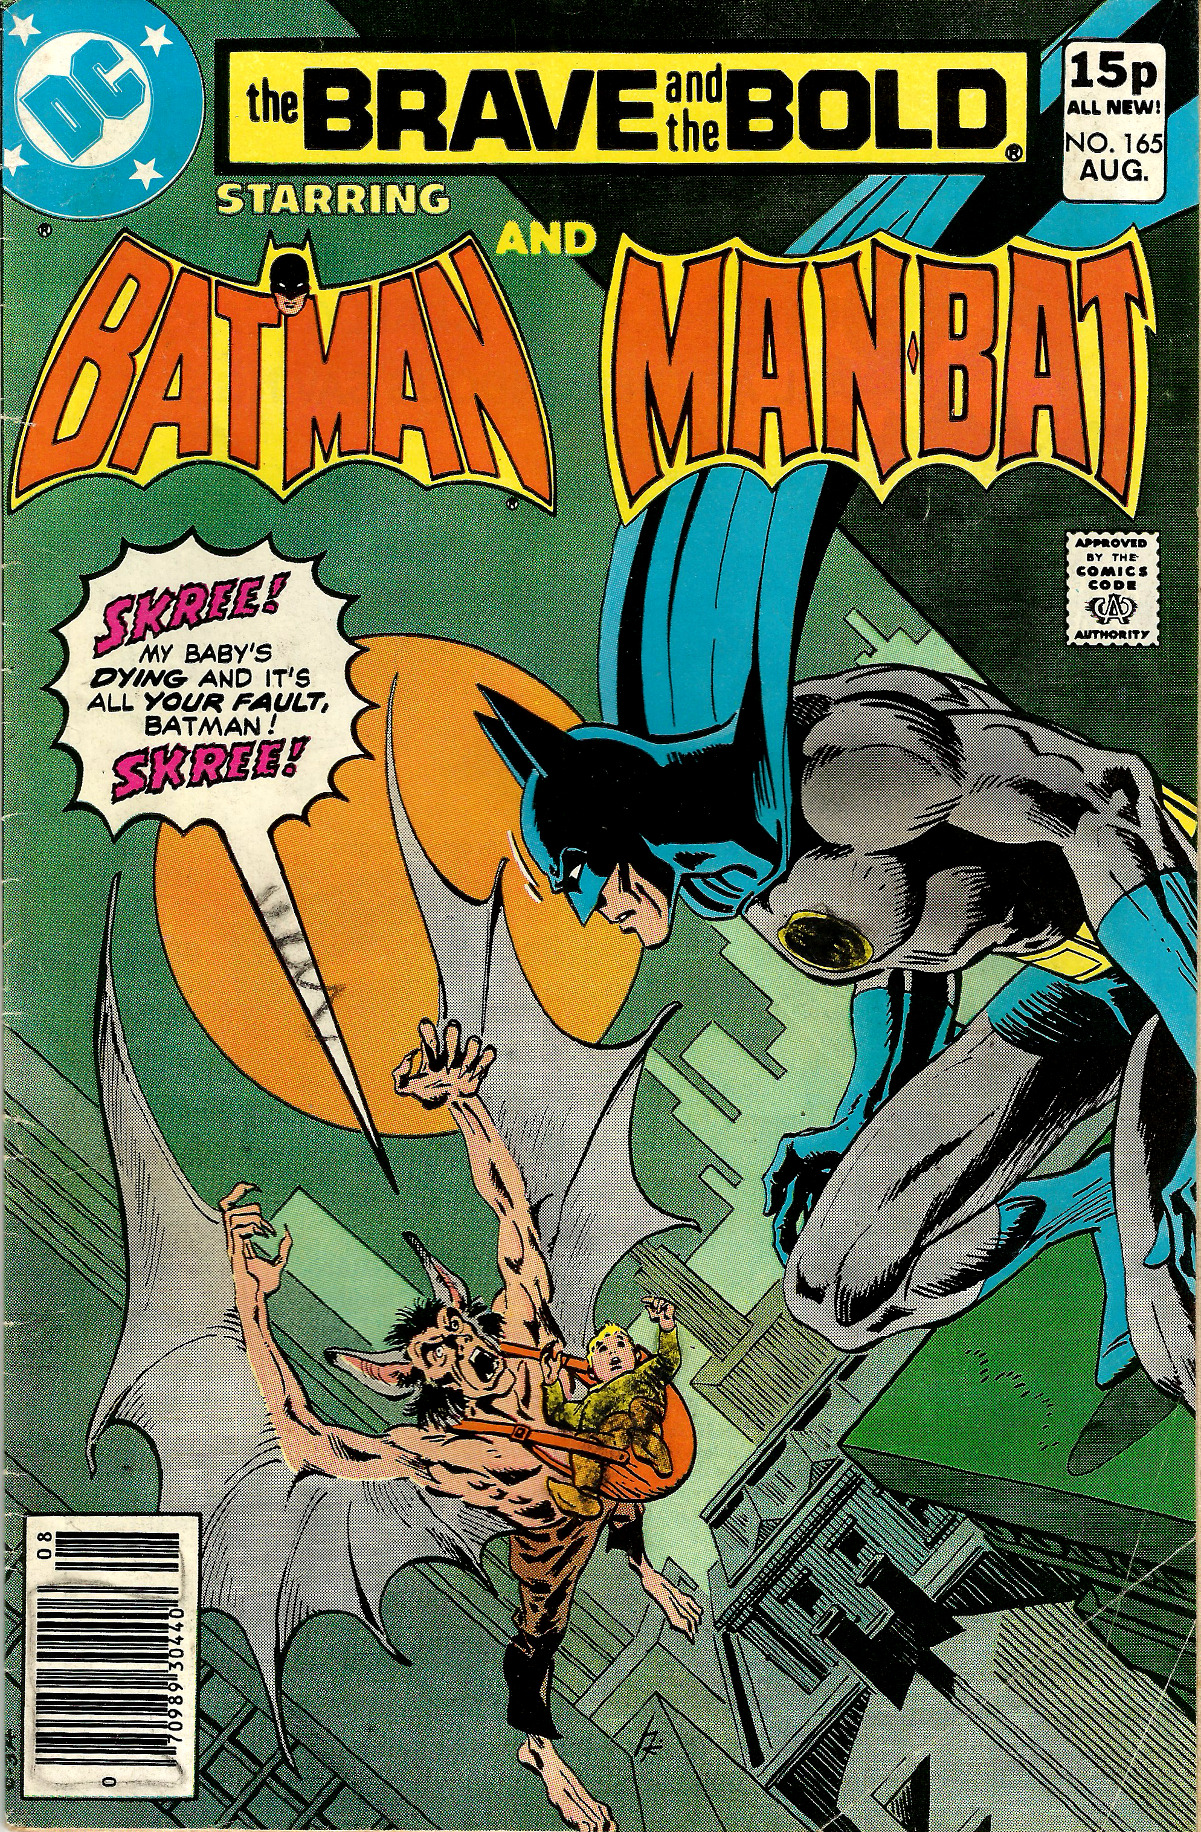 The Brave and the Bold No. 165 (DC Comics, 1980). Cover art by Jim Aparo. From a